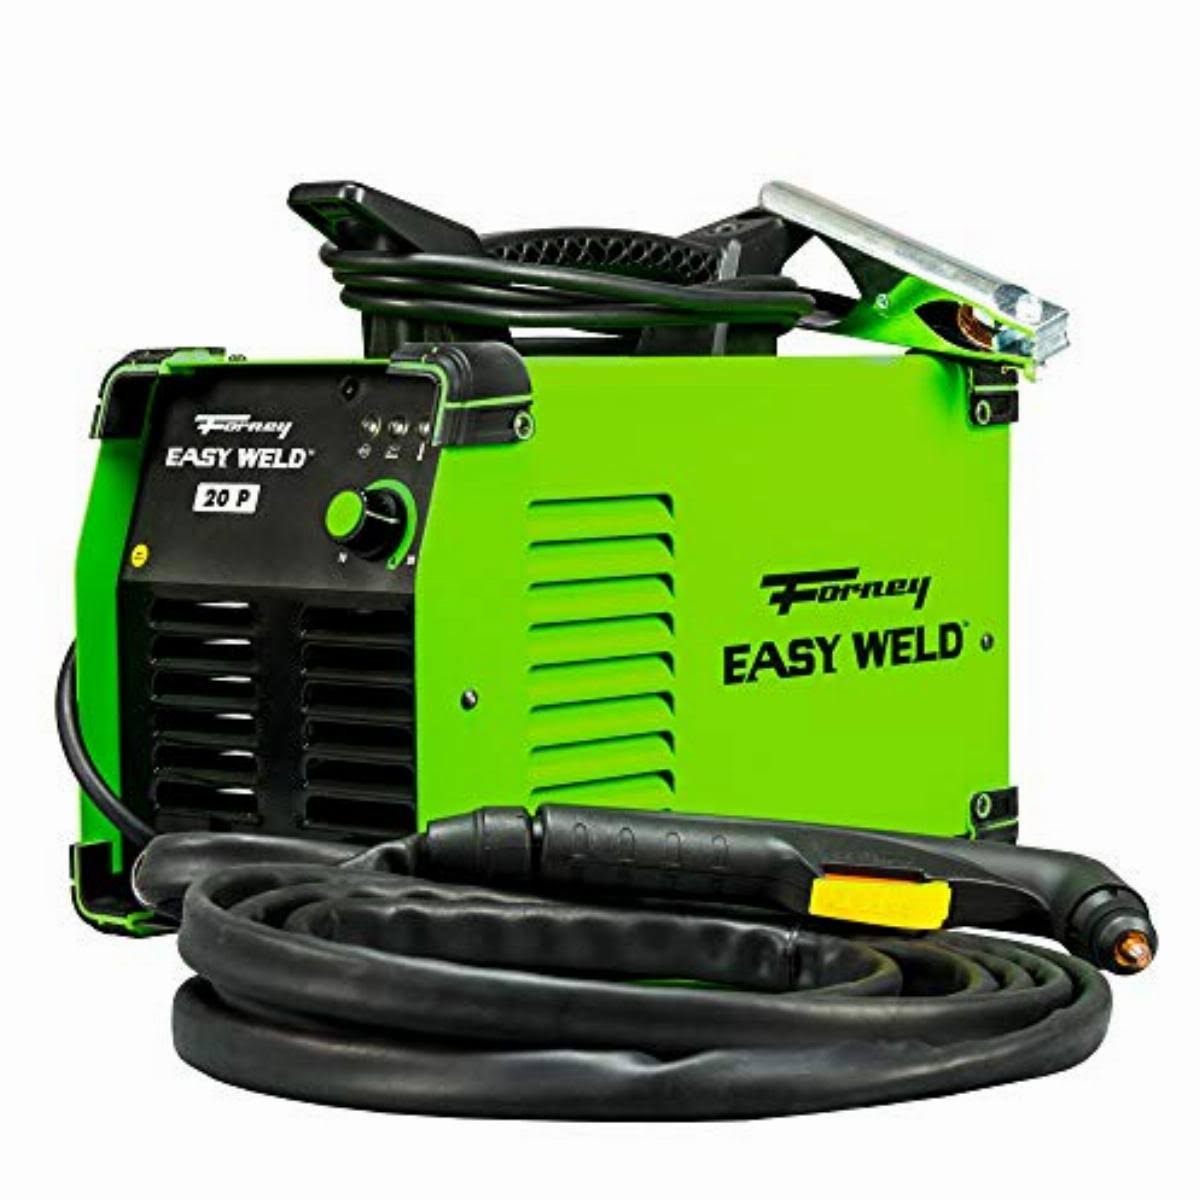 Forney Industries Easy Weld Plasma Cutter - 120V, 20A